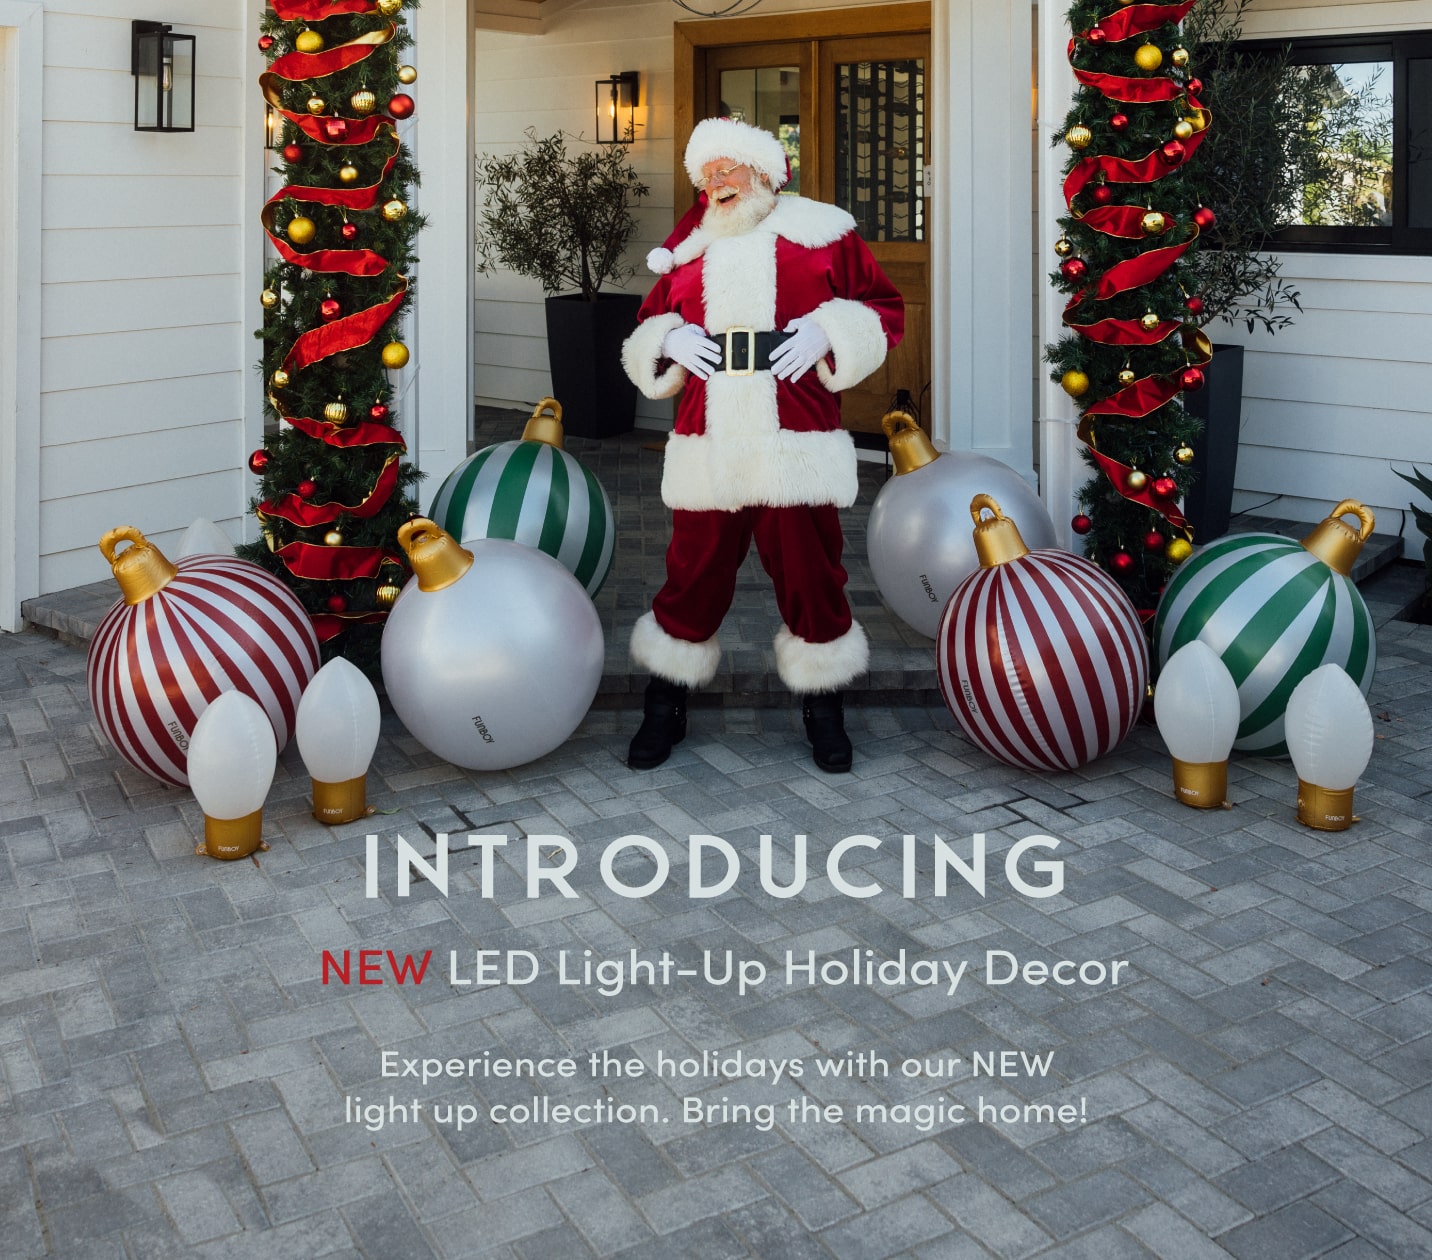 Introducing NEW Led light -up Holiday Decor. Experience the holidays with our New light up collection. Bring the magic home!